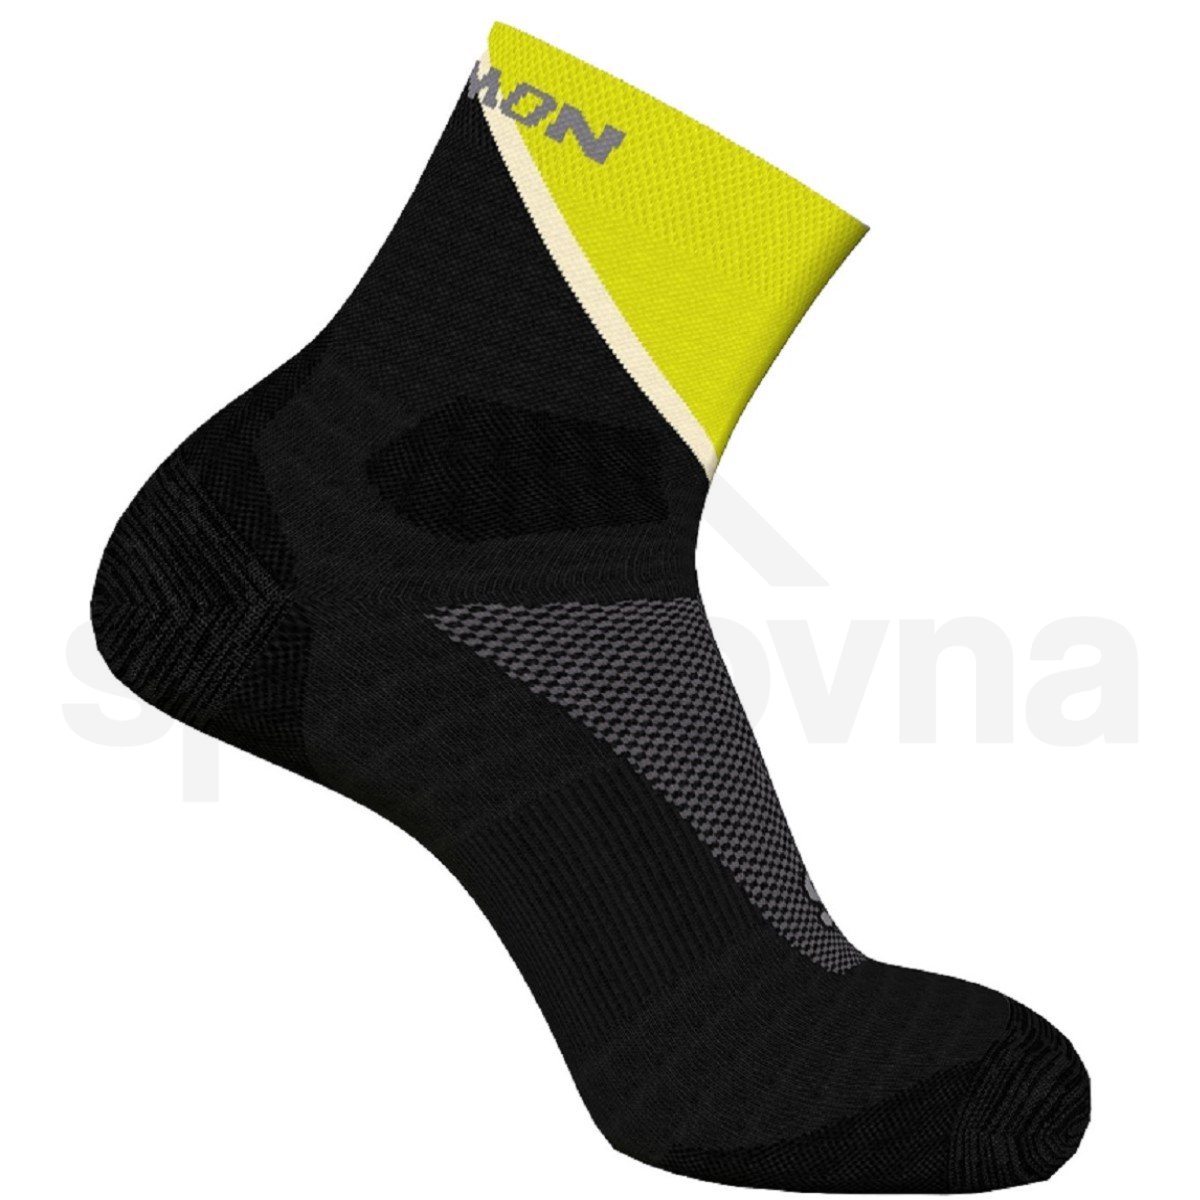 LC2255900_0_VIR_PULSE ANKLE-BLACK-Sulphur spring-Transparent yellow.png.high-res